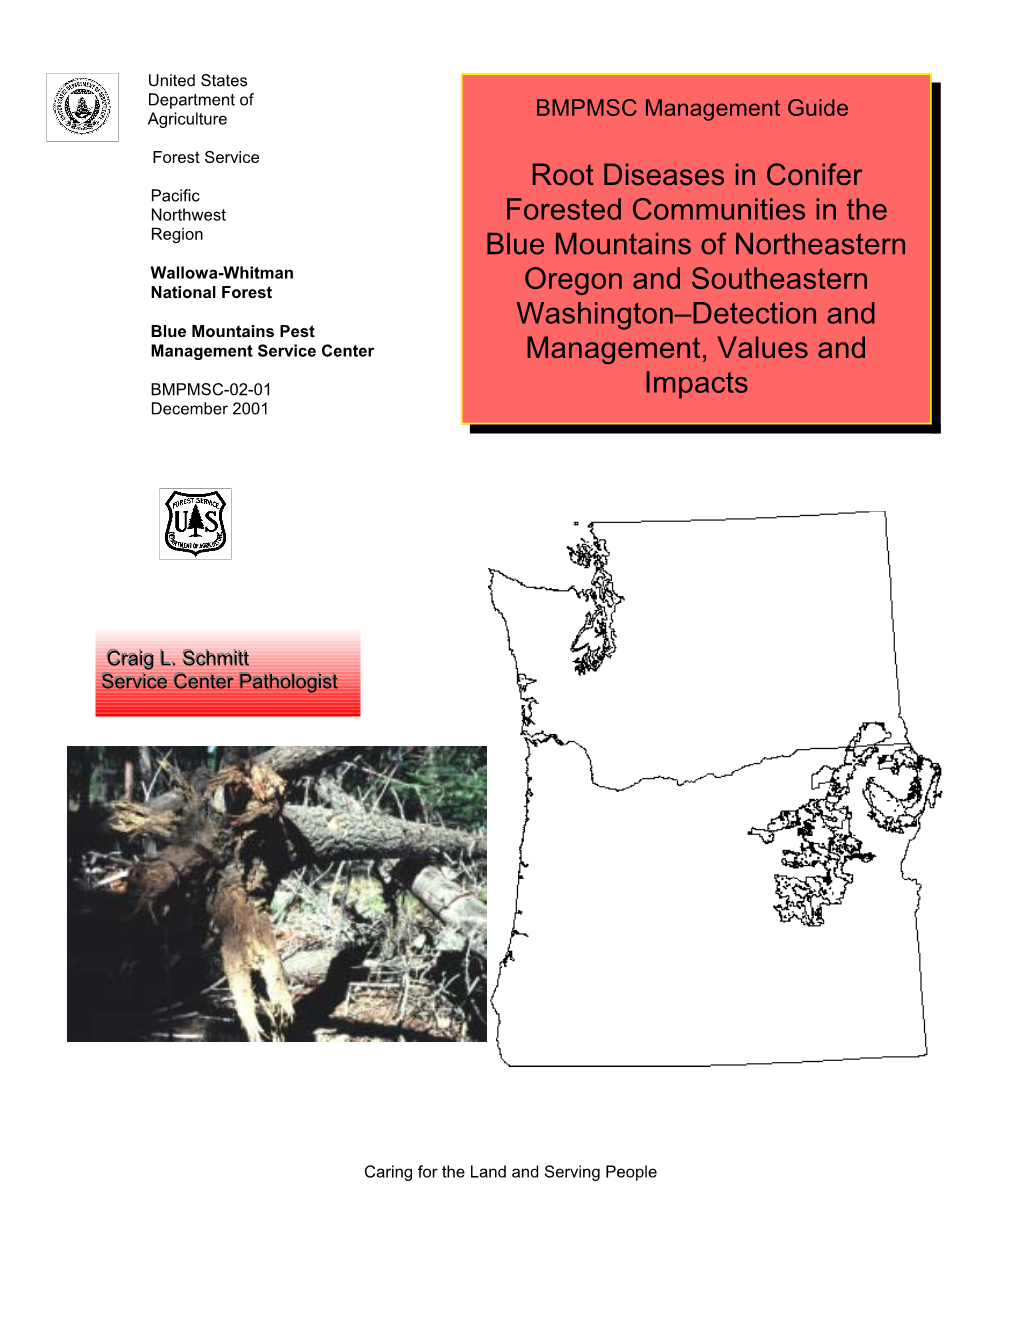 Root Diseases in Conifer Forested Communities in the Blue Mountains of Northeastern Oregon and Southeastern Washington-- Detection and Management, Values and Impacts